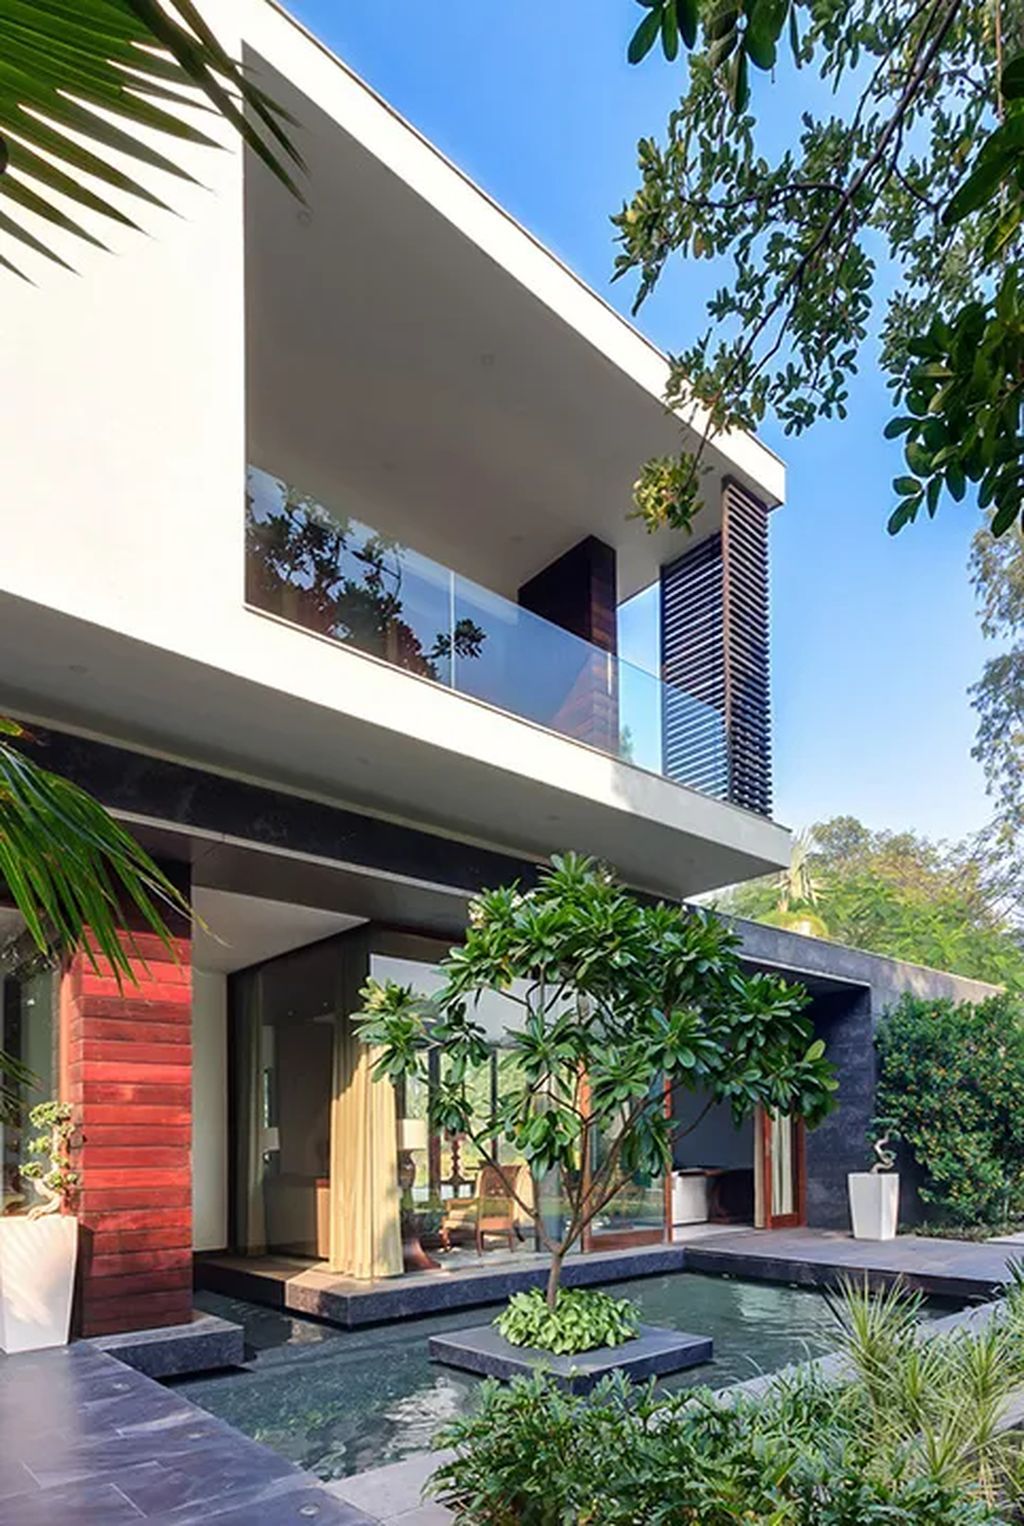 Bridge House, Masterpiece of Architecture and Nature by DADA Partners